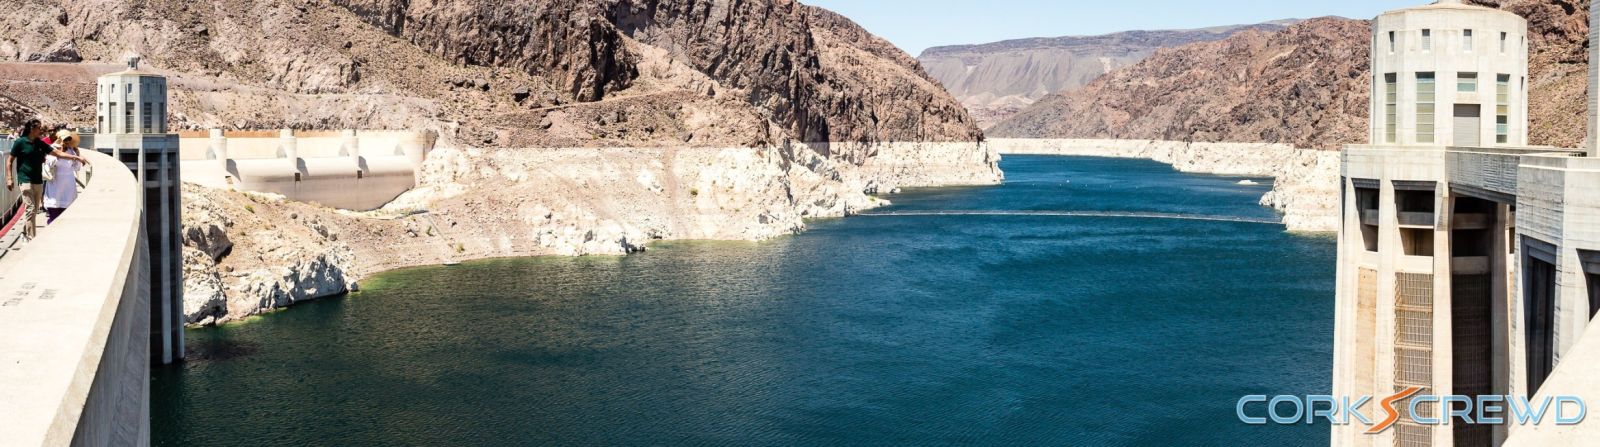 Illustration for article titled Photos from my recent trip to Hoover Dam